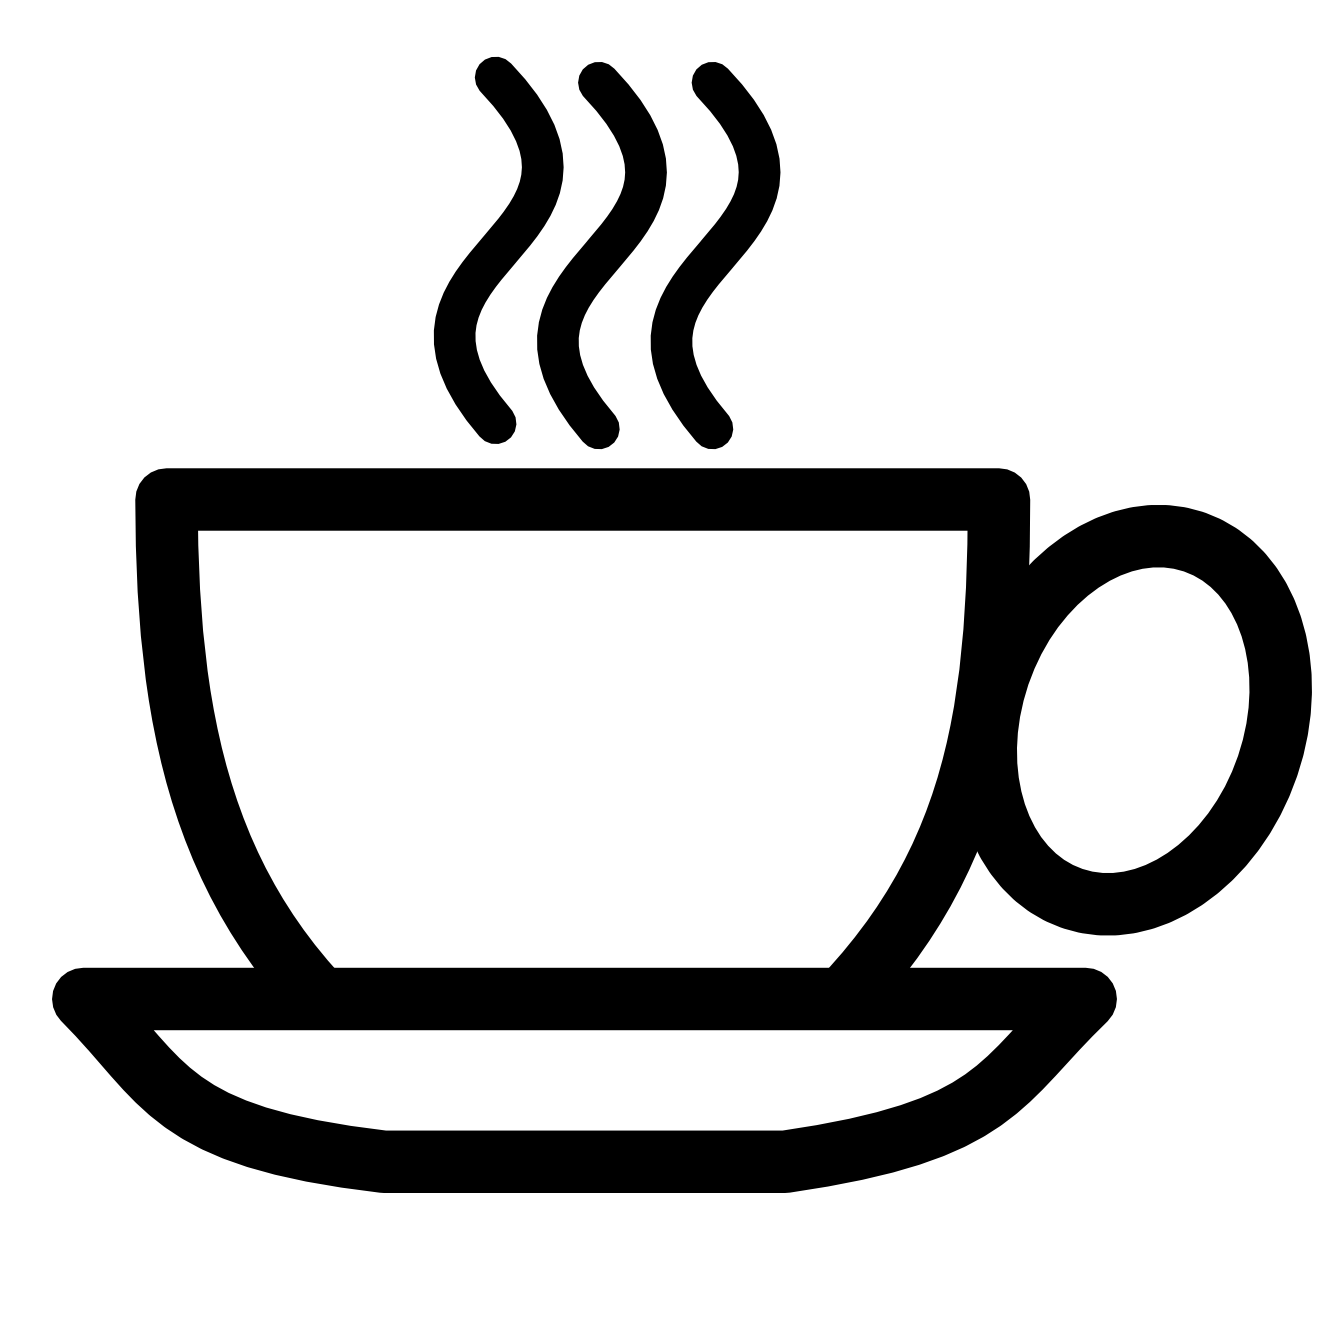 Coffee Clipart Images